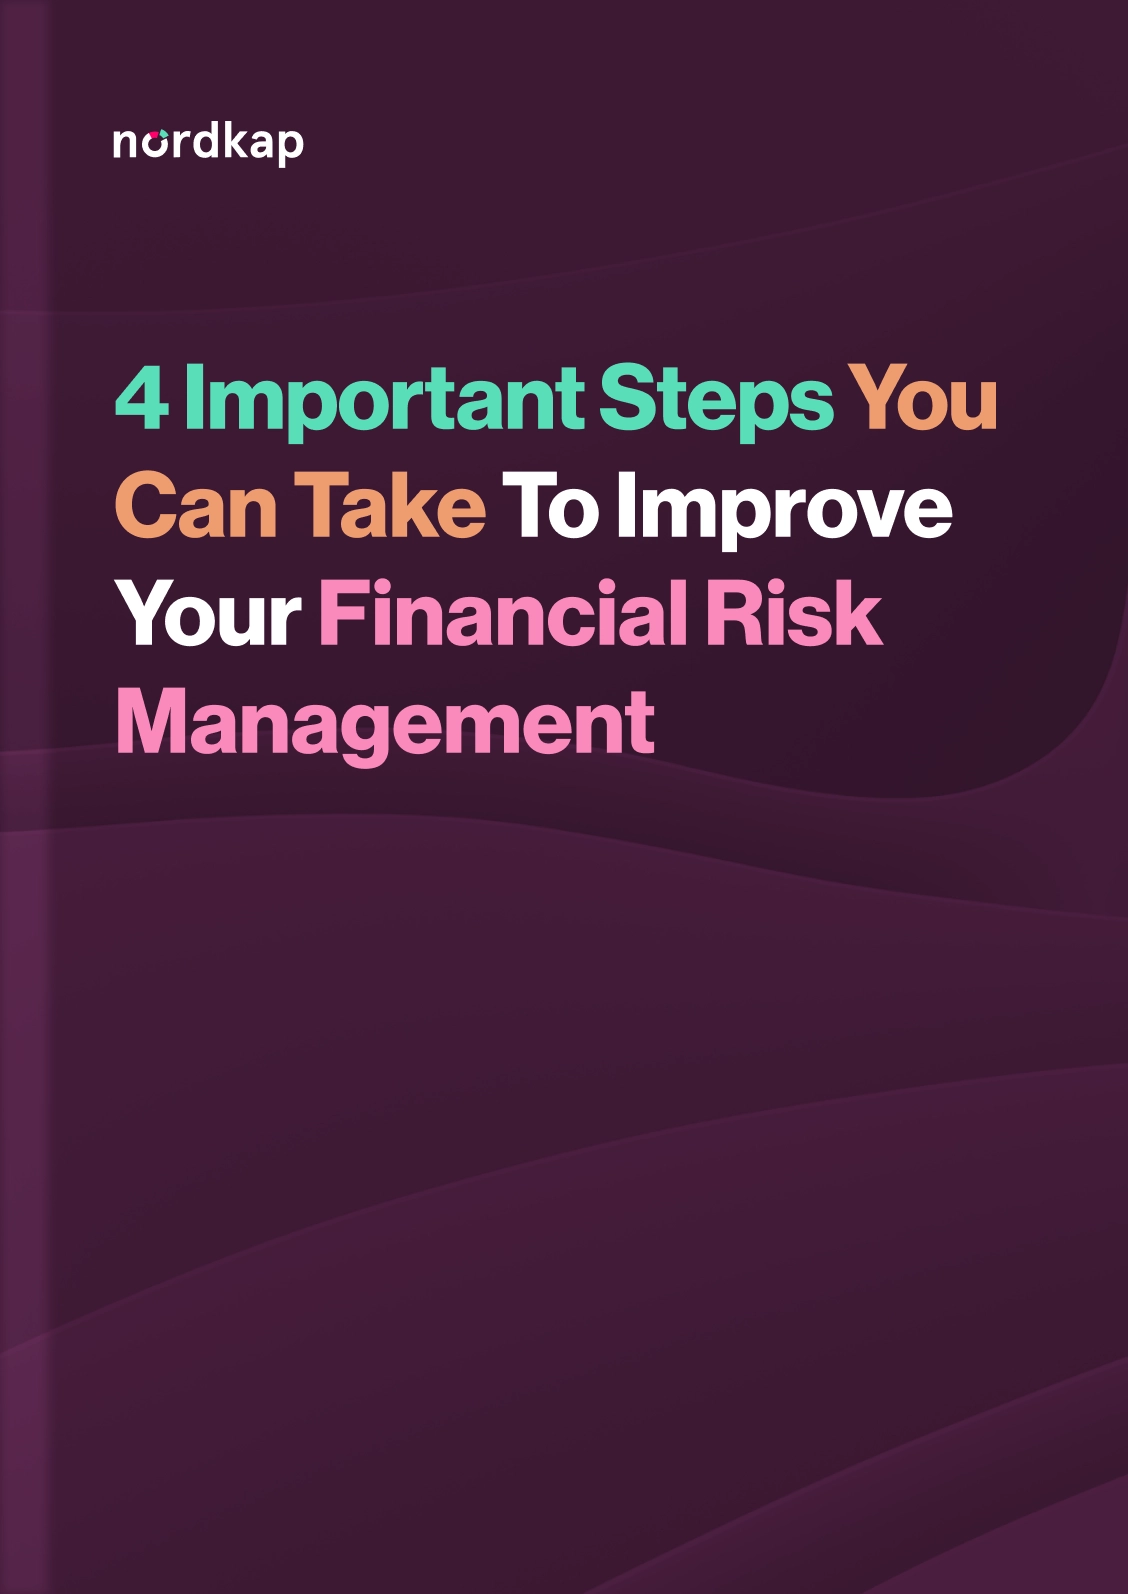 4-important-steps-you-can-take-to-improve-your-financial-risk-management (2)